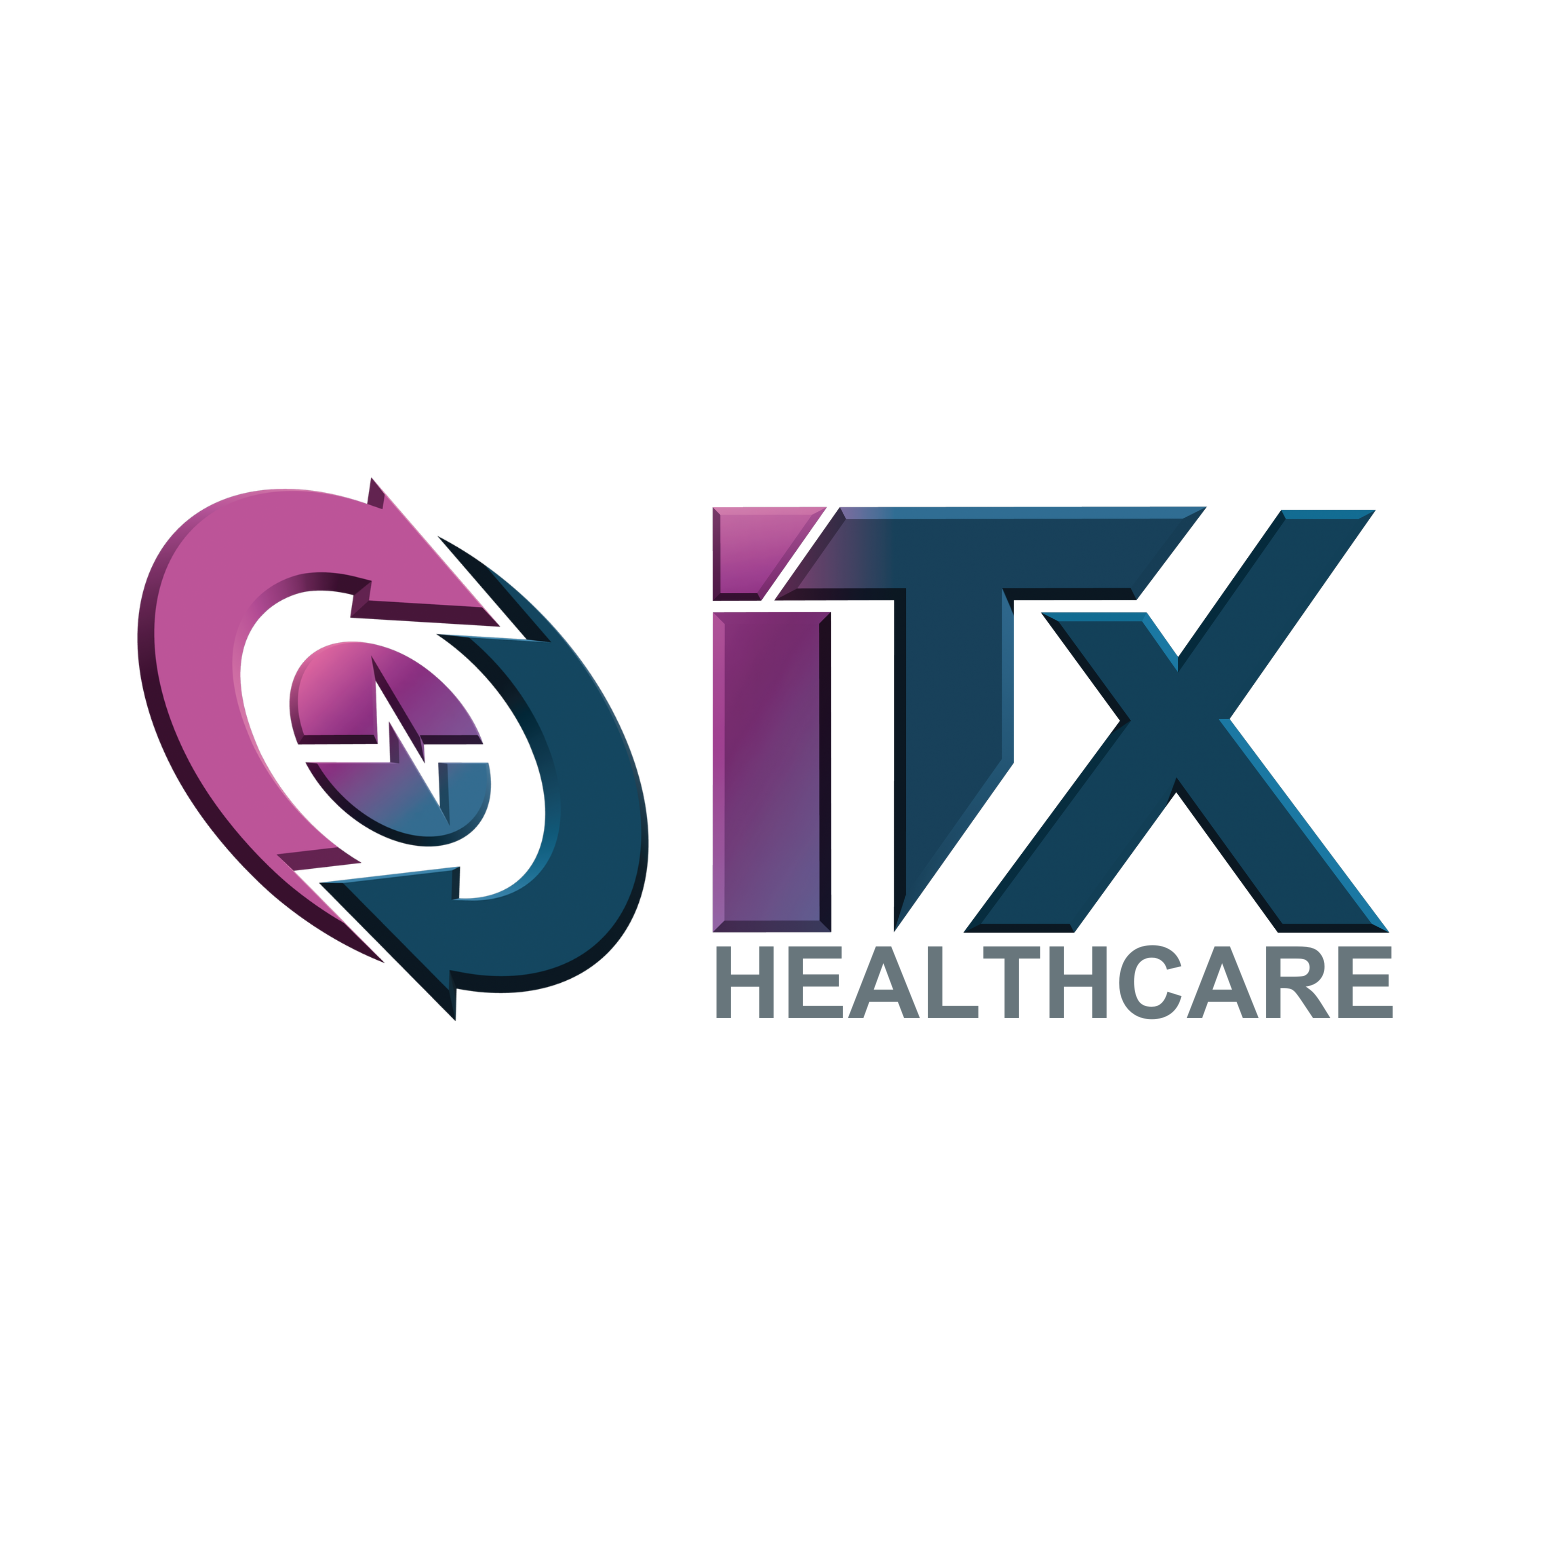 Welcome to the ITx Healthcare Payment Portal